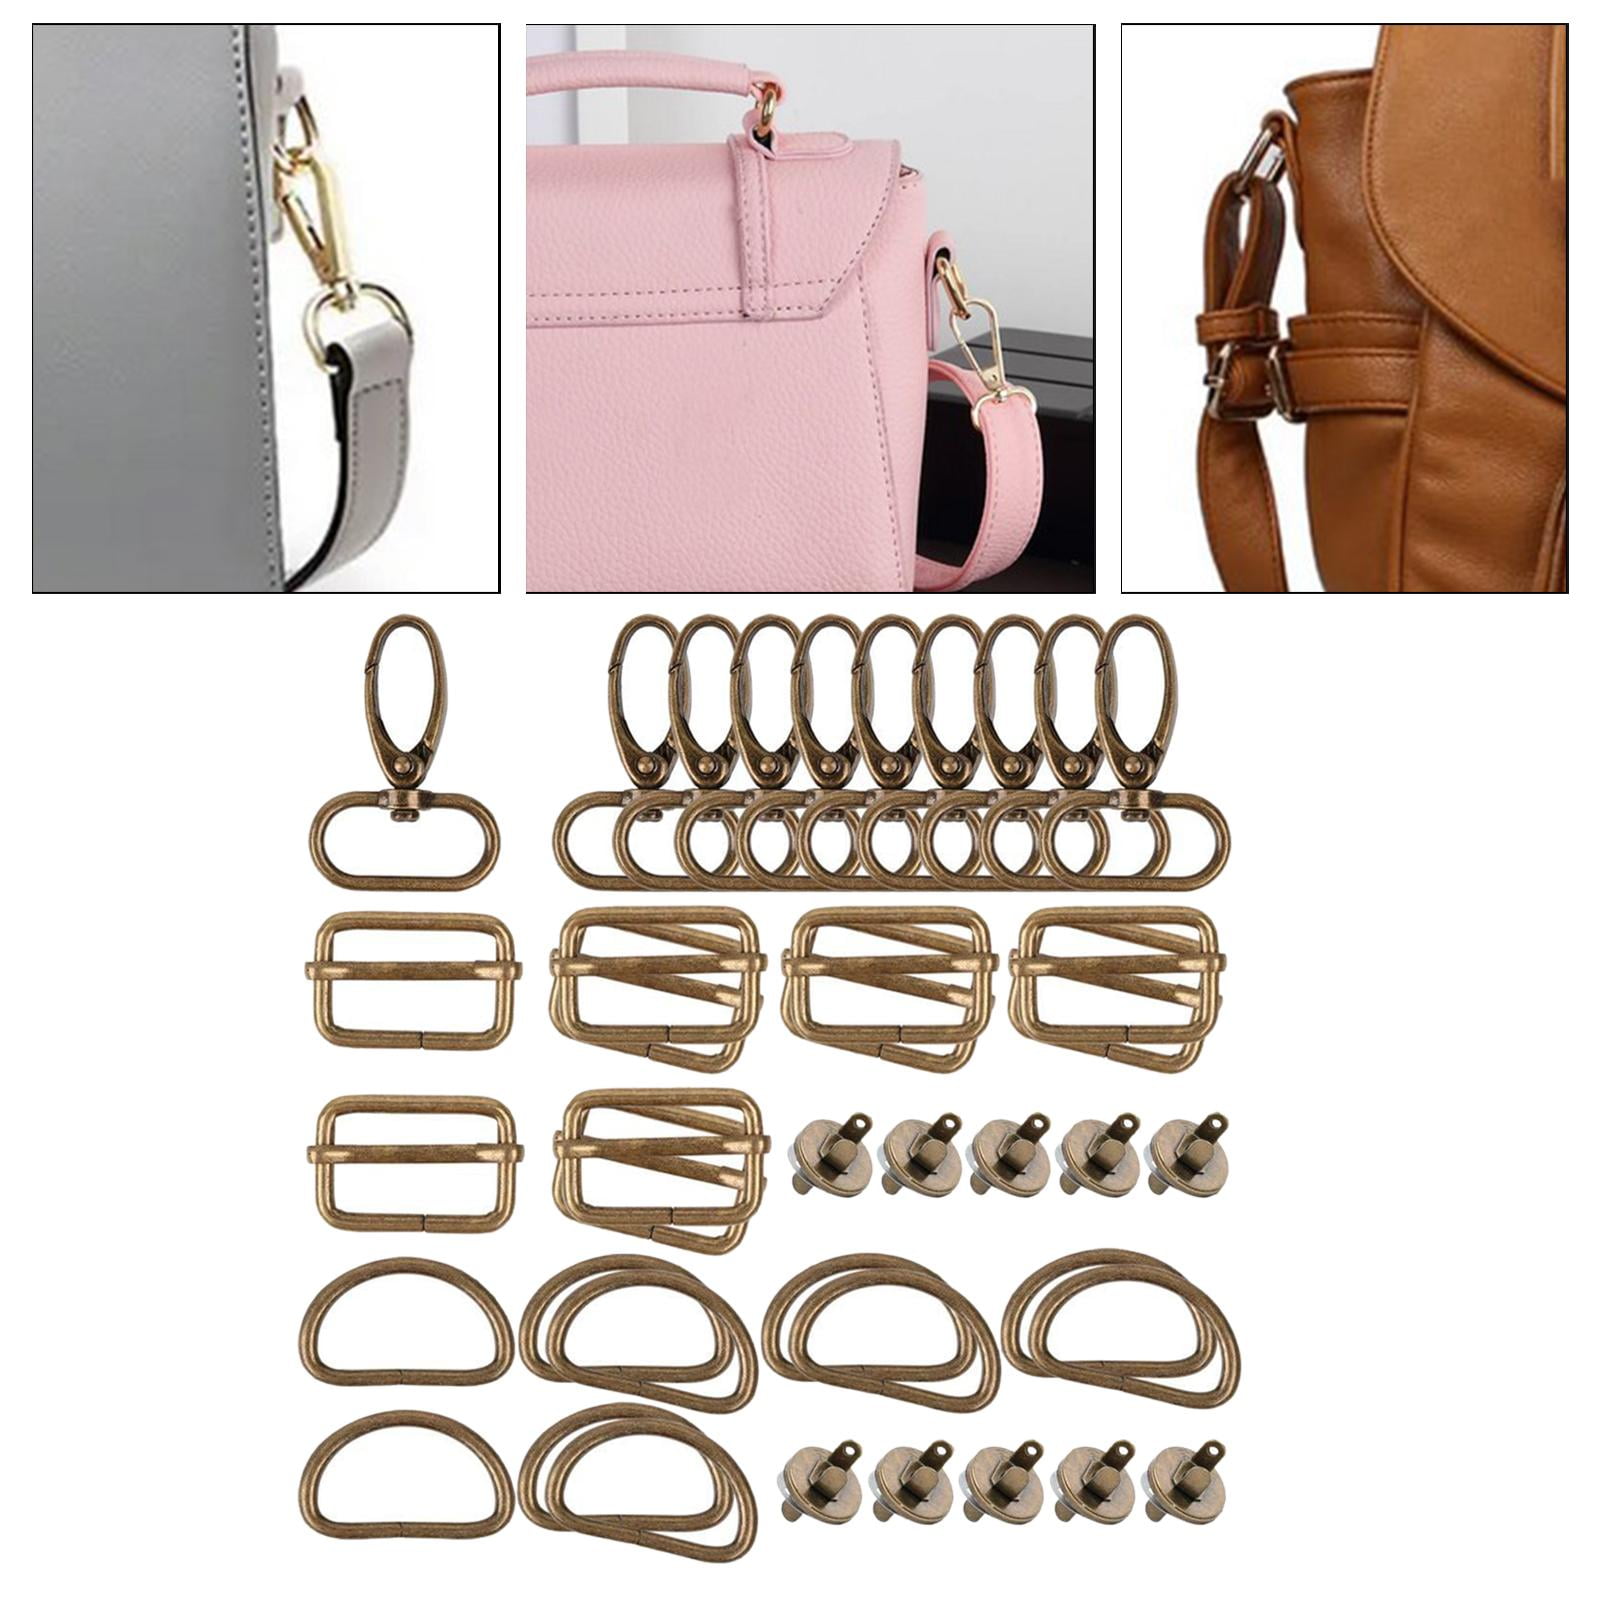 10Pcs Bag Strap Connector, DIY Bag Purse Making Supplies Durable Metal Tail  Clip with Key Ring Hand-Made Metal Bag Clip : Amazon.in: Home & Kitchen